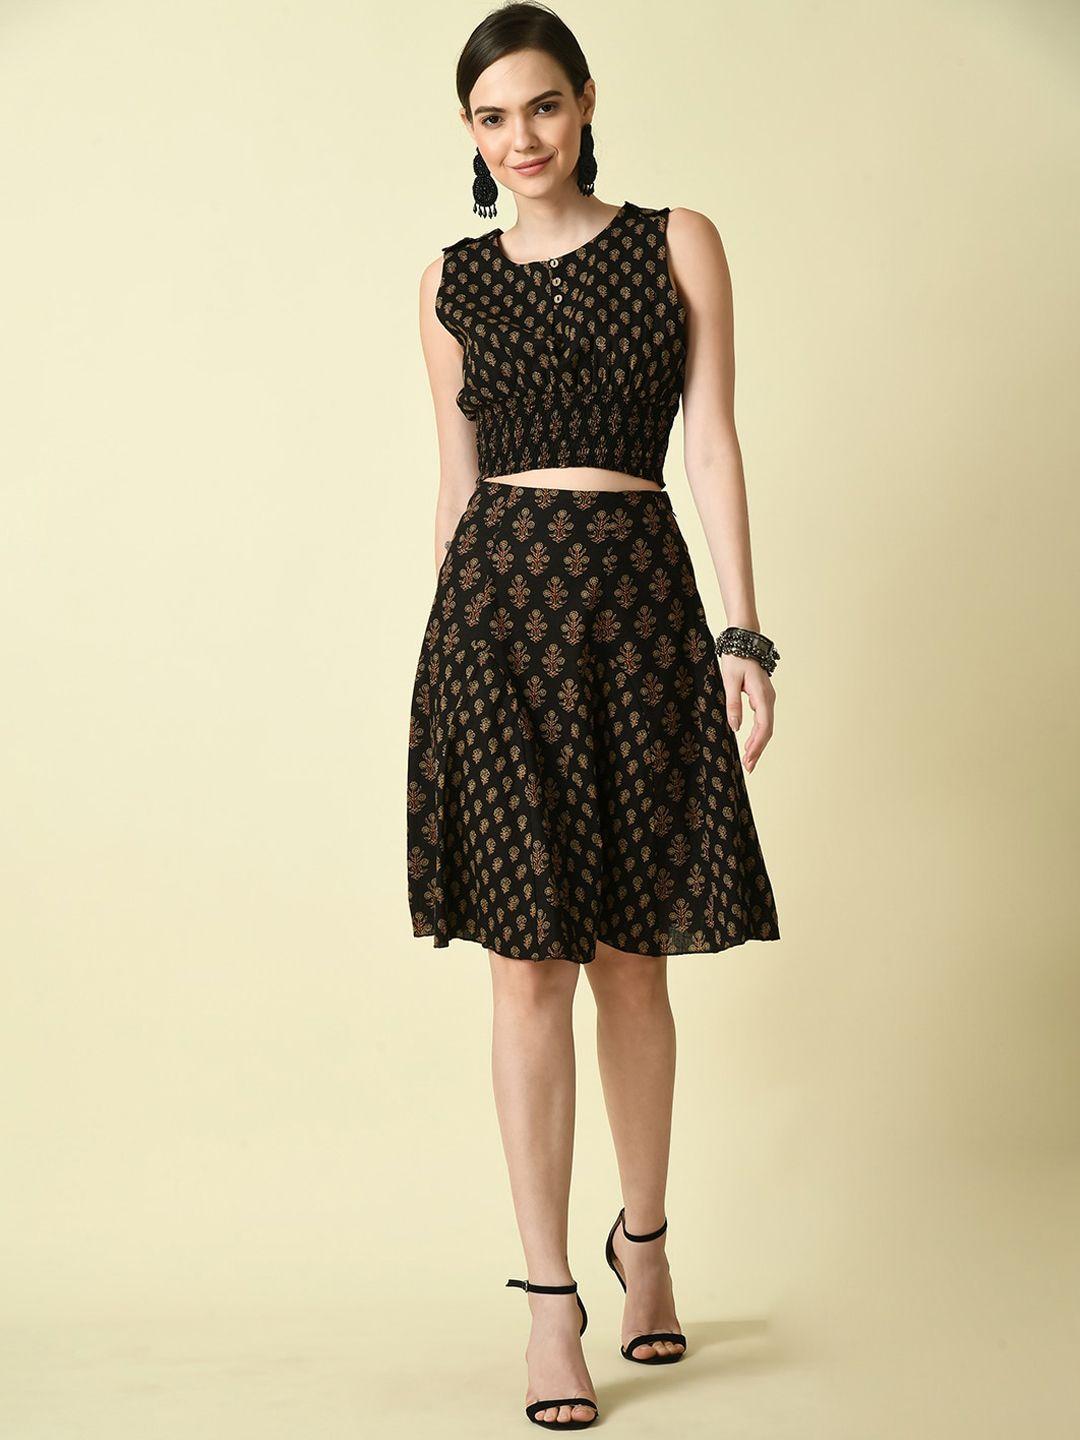 dressberry black printed sleeveless pure cotton top & skirt co-ord